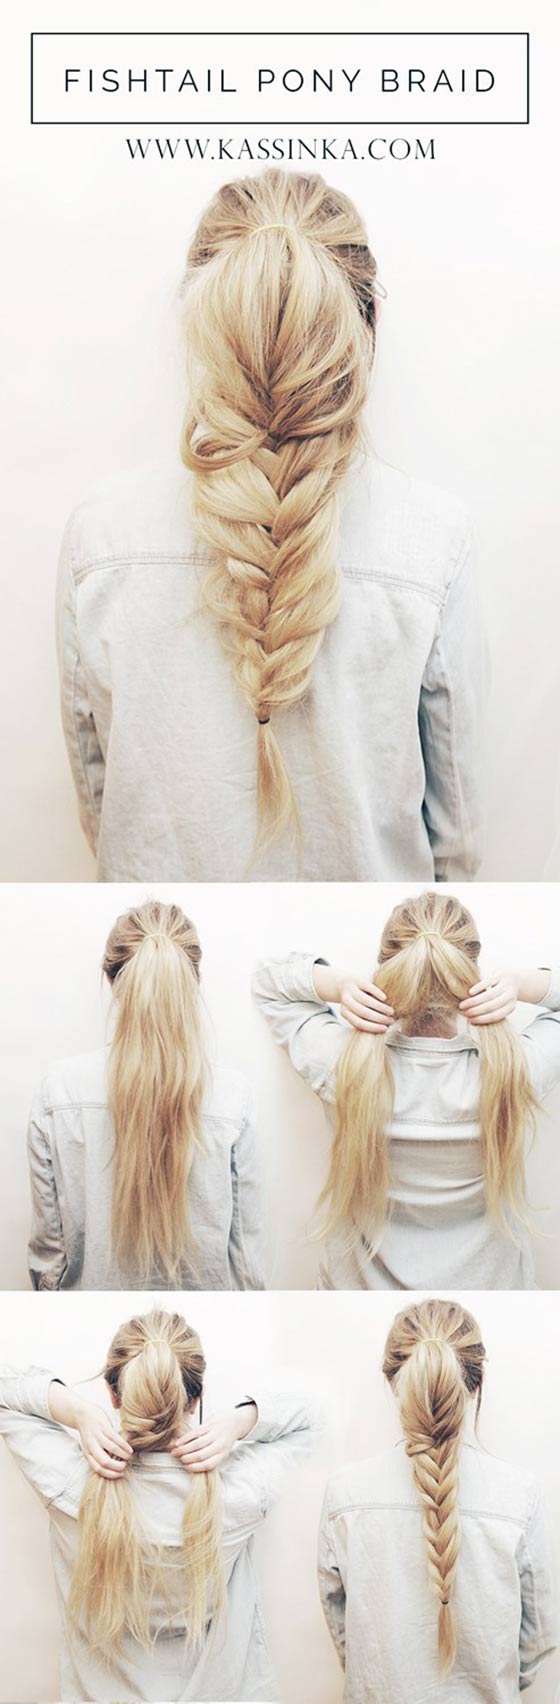 Fishtail pony braided hairstyle for long hair